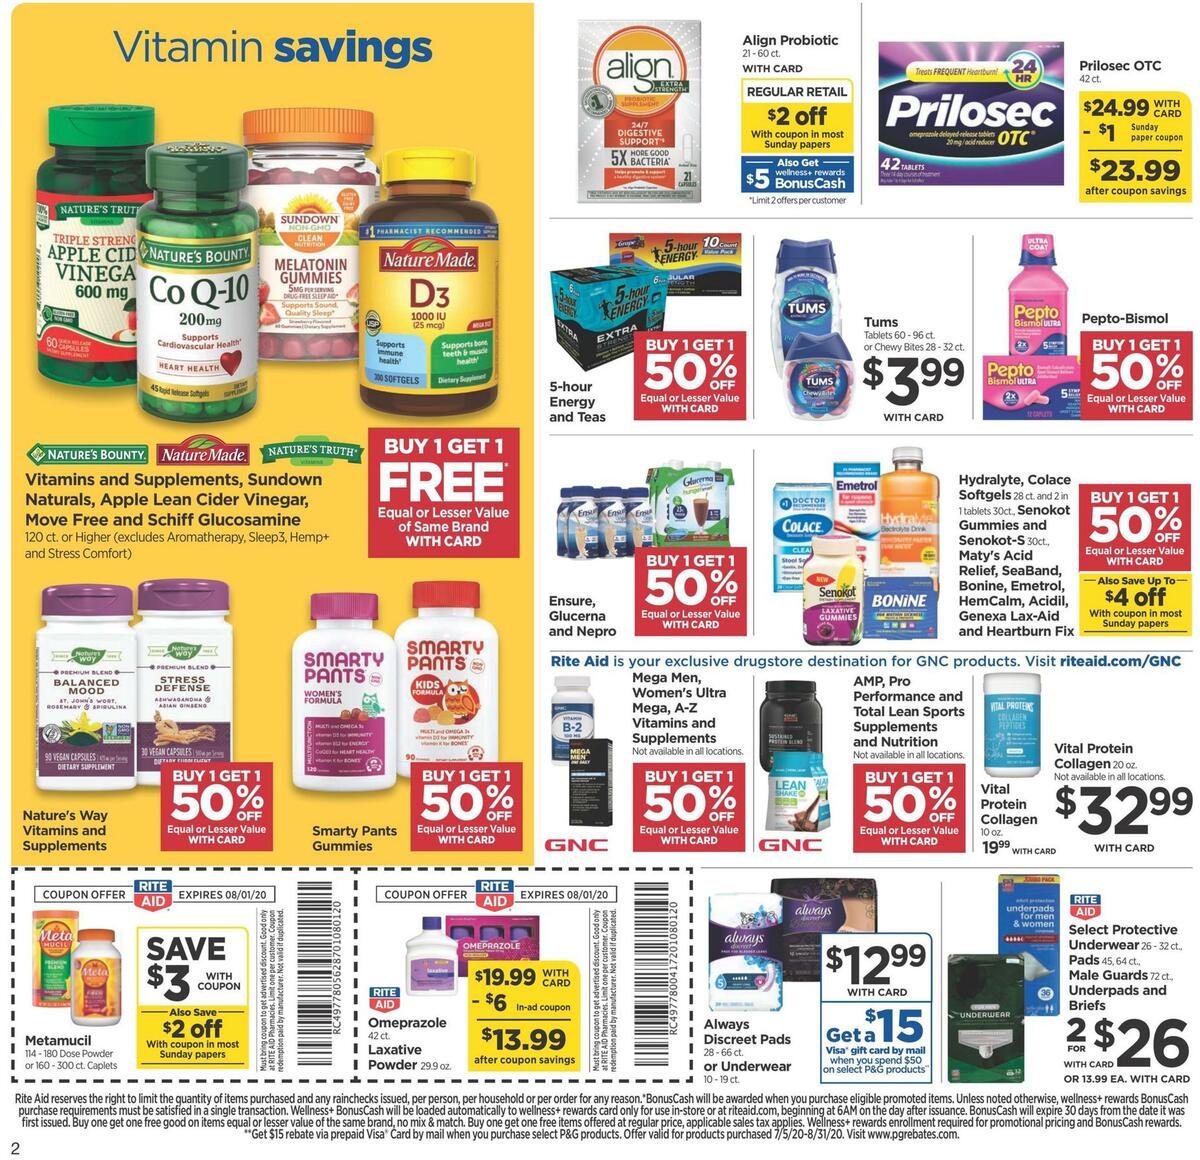 Rite Aid Weekly Ad from July 26